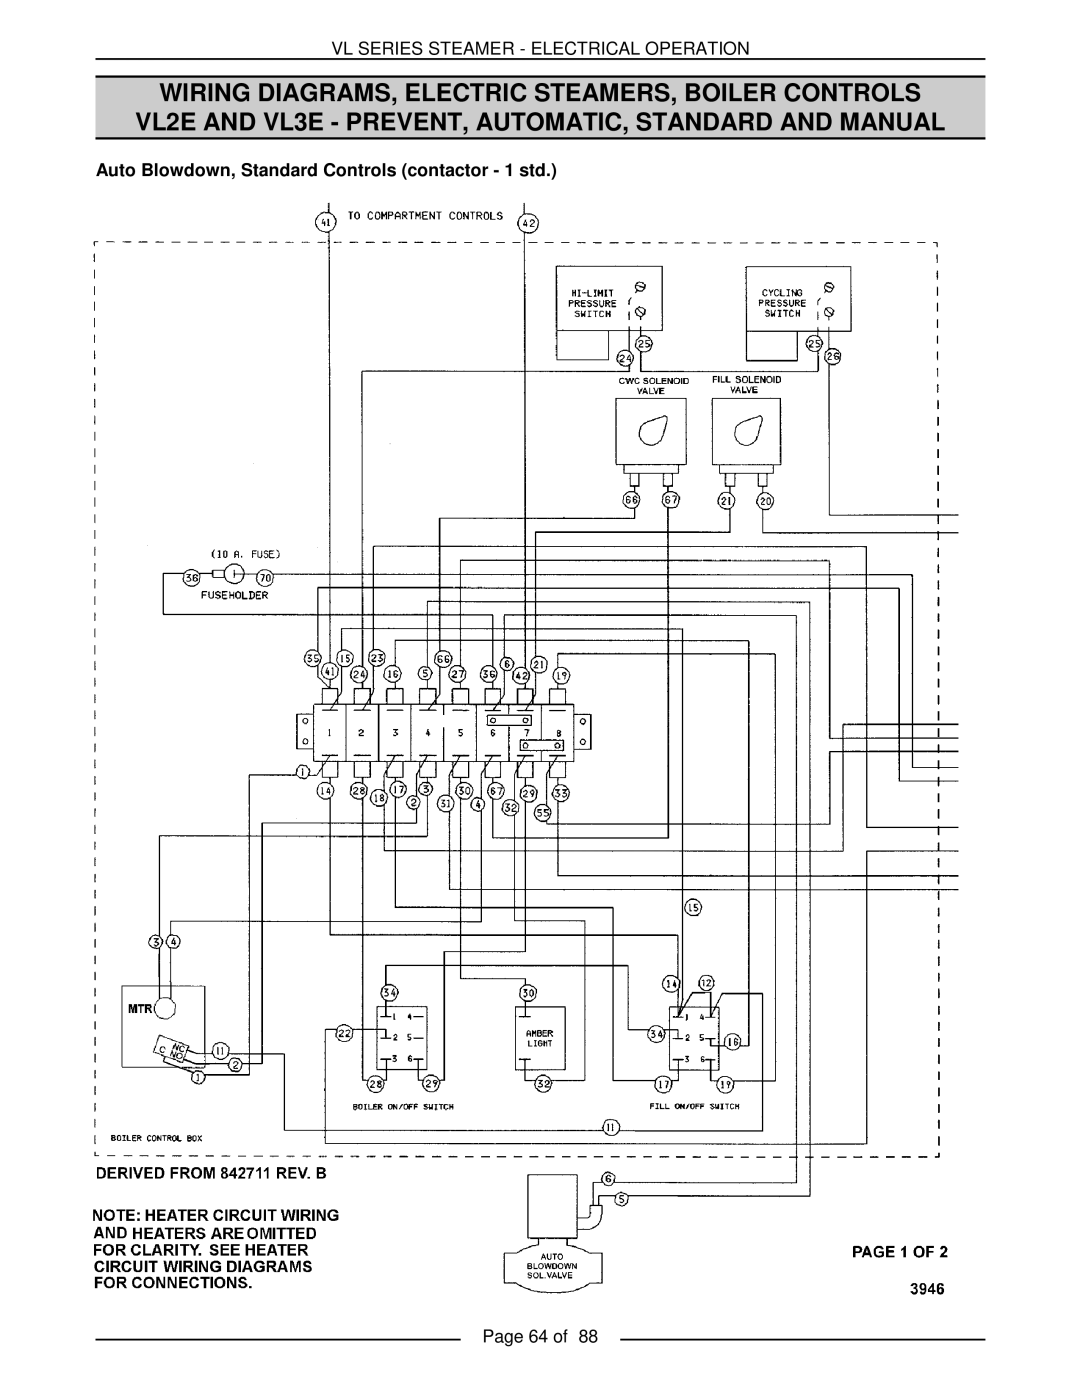 Vulcan-Hart VL3GMS, VL2GMS, VL3GAS, VL2GAS, VL2GSS, VL3GSS, VL3GPS, VL2GPS Vl Series Steamer - Electrical Operation, Page 64 of 